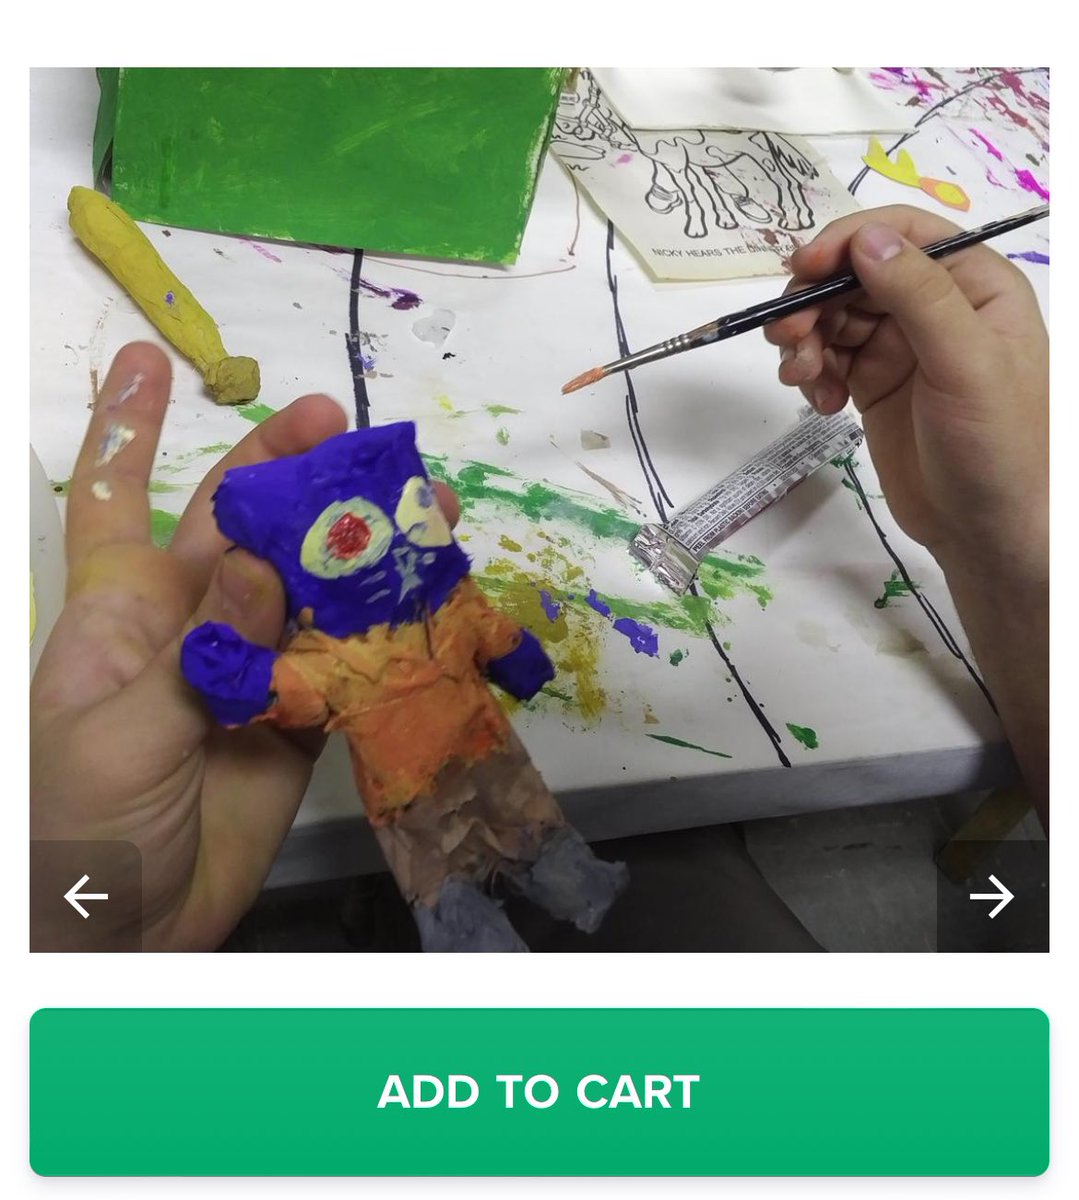 need @bombsfall to know that my local community art space has some kid or teen’s hand-painted paper-mache Mae on their website advertising one of their summer art camps